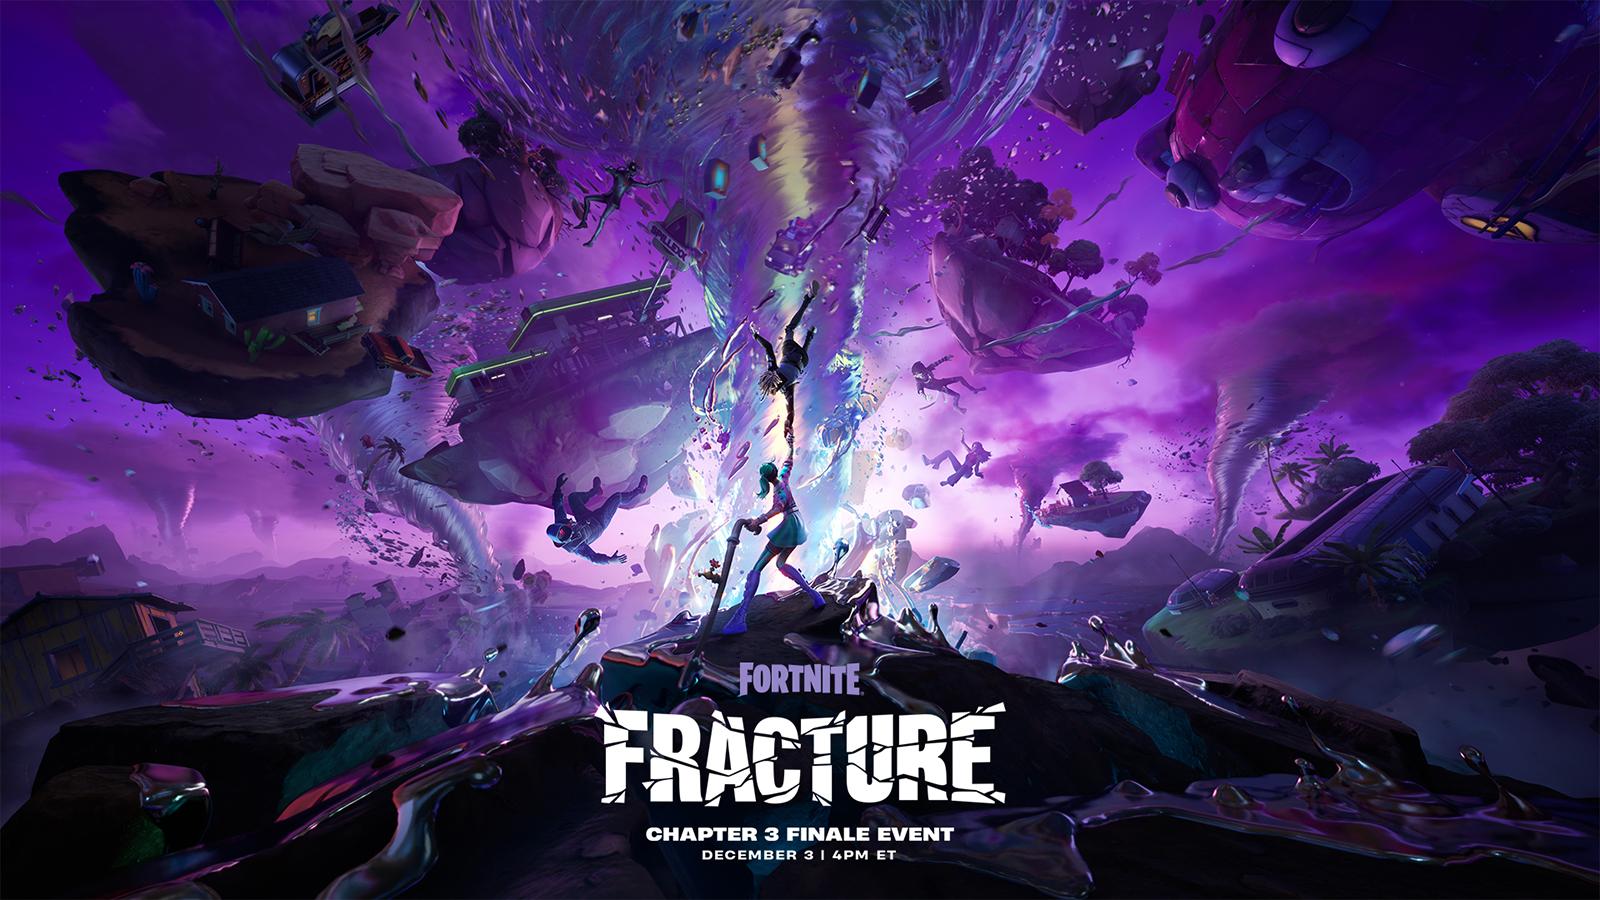 A poster for the Fortnite Fracture live event